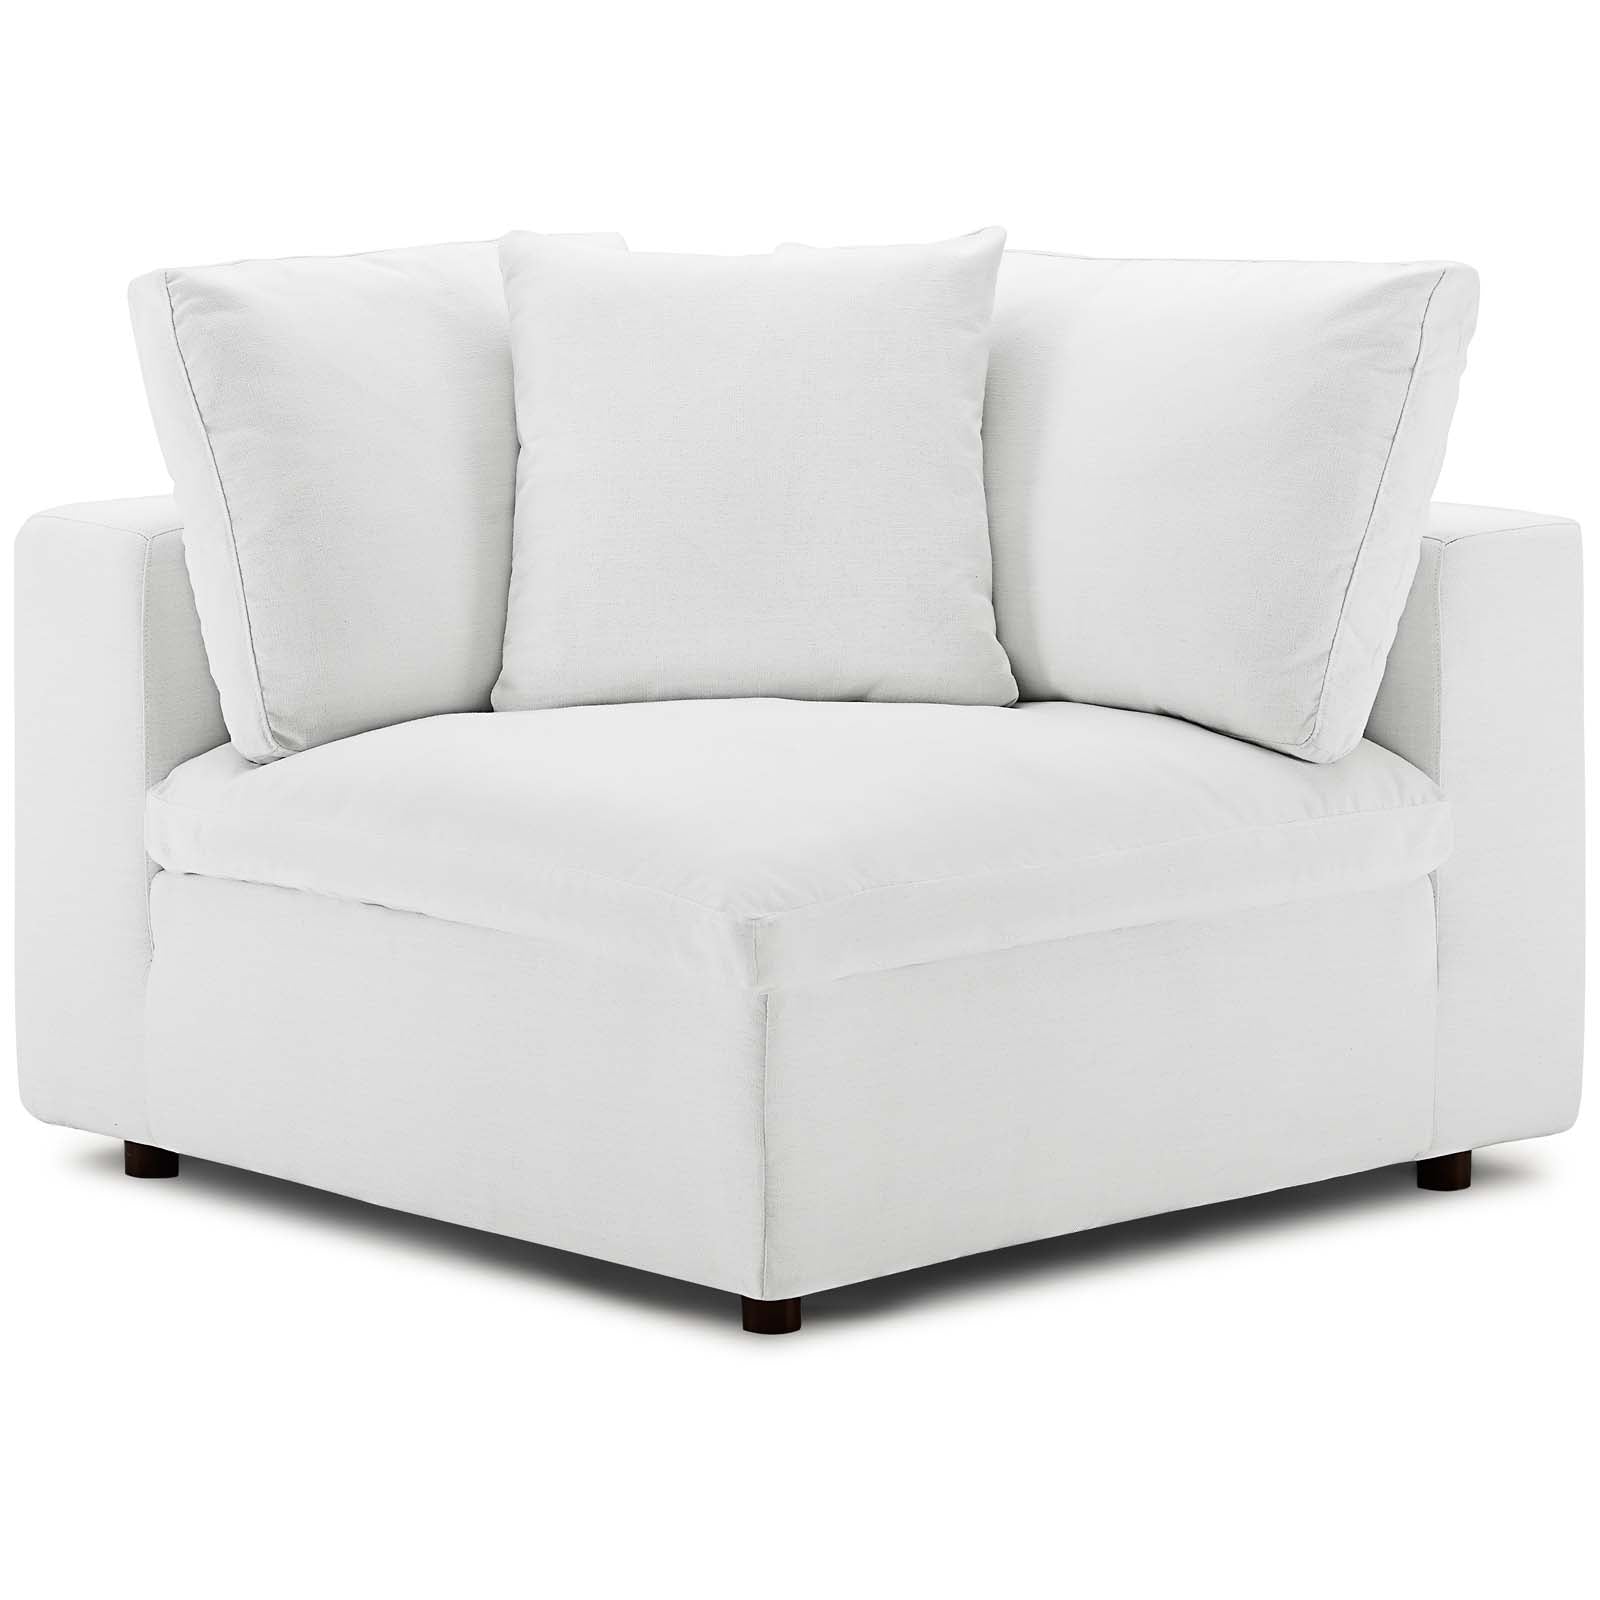 Commix Down Filled Overstuffed Corner Chair - East Shore Modern Home Furnishings